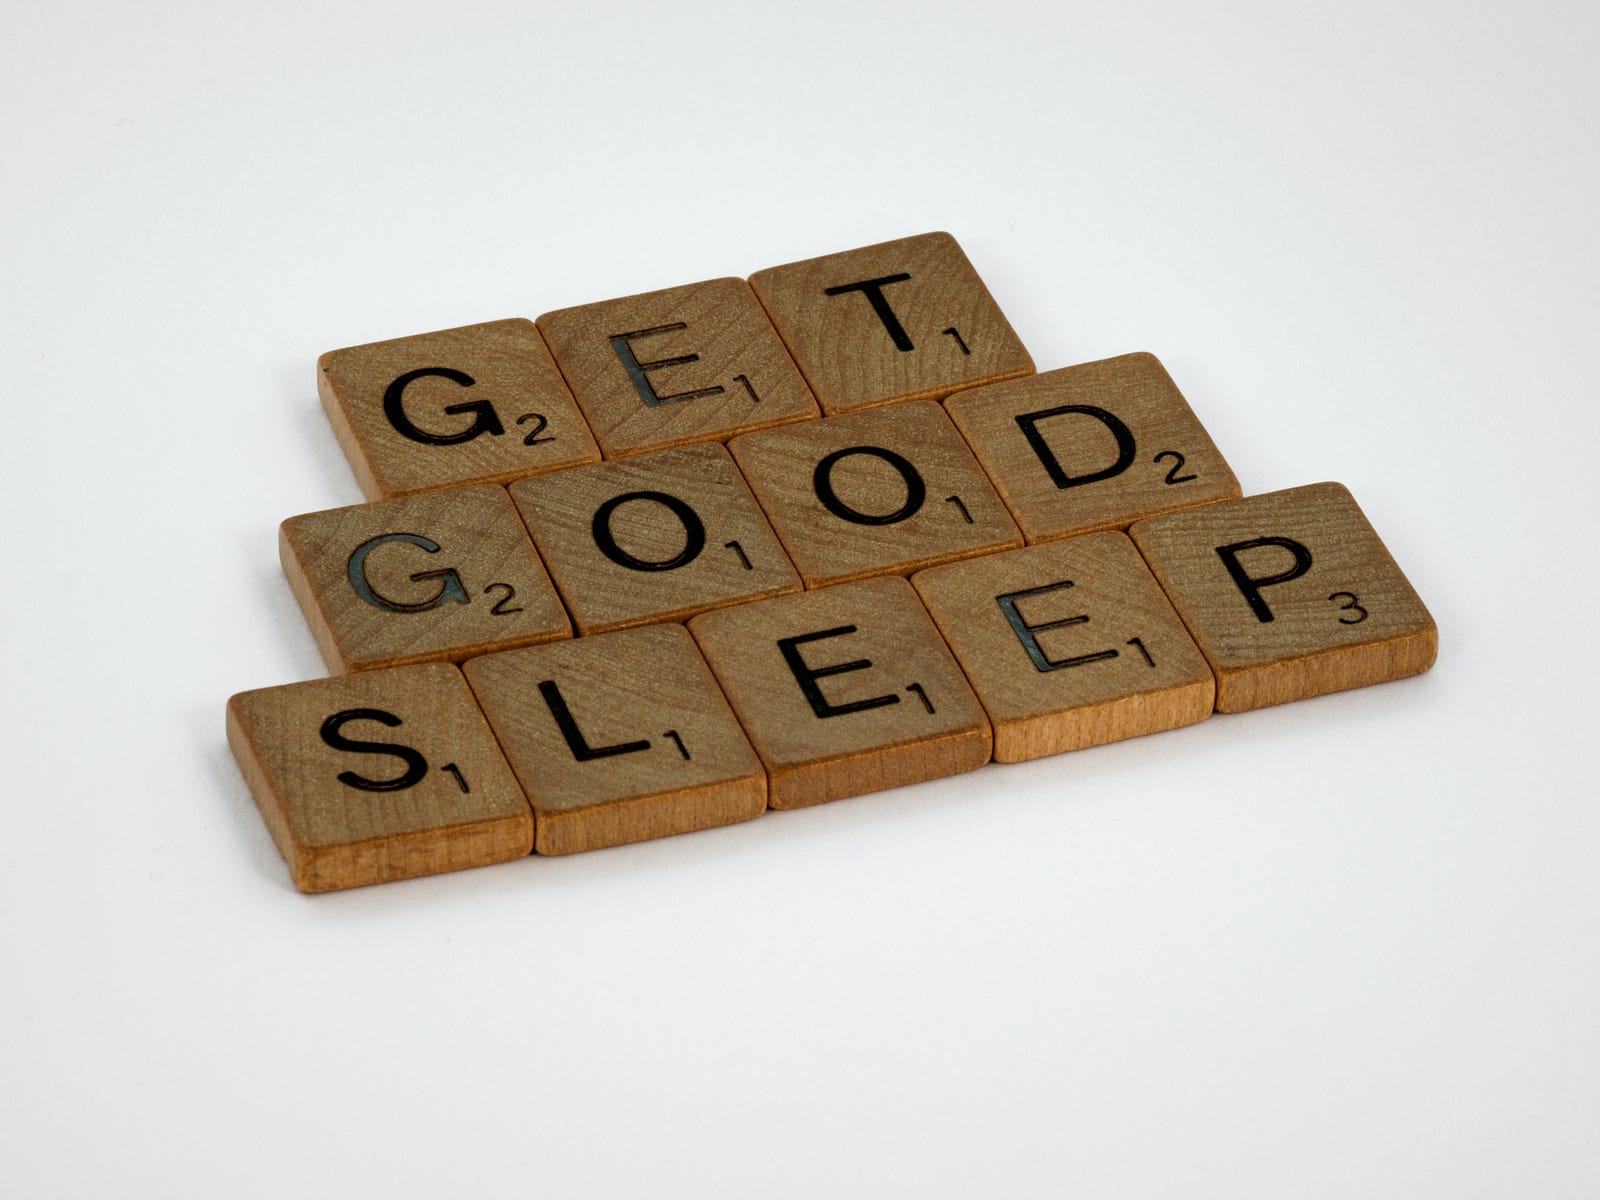 Scrabble tiles spell out “GET GOOD SLEEP.” Researchers used a prospective cohort design based on the U.K. Biobank (UKB) to examine the associations between sleep quality and health span (how well you live). Healthy sleep quality was associated with a reduced risk of premature end of healthspan, suggesting healthy sleep behavior may extend health span.